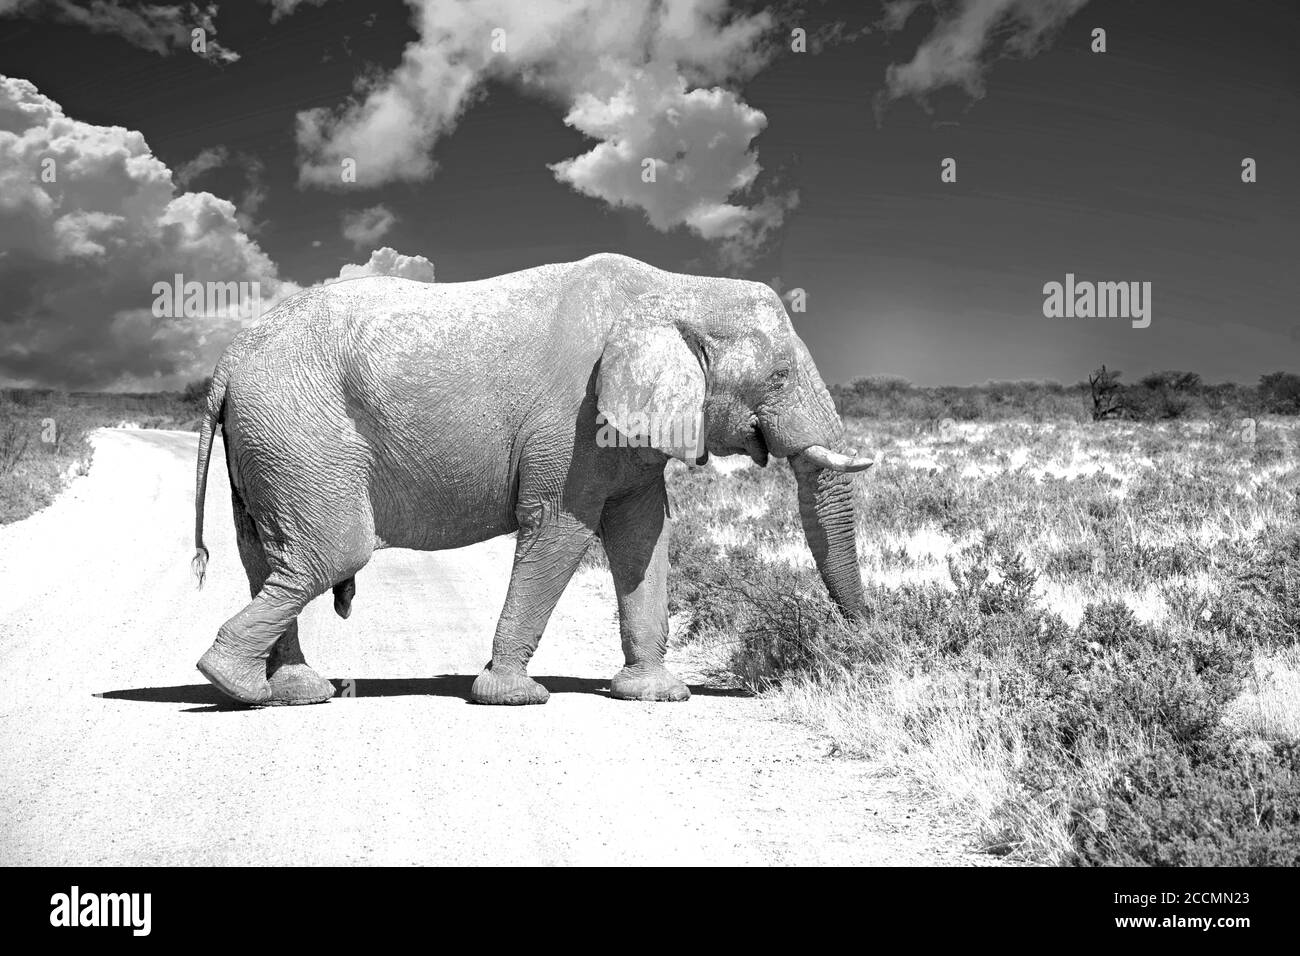 Large Elephant waking across a dry dusty road with a nice cloudscape background in black and white Etosha National Park, Namibia Stock Photo